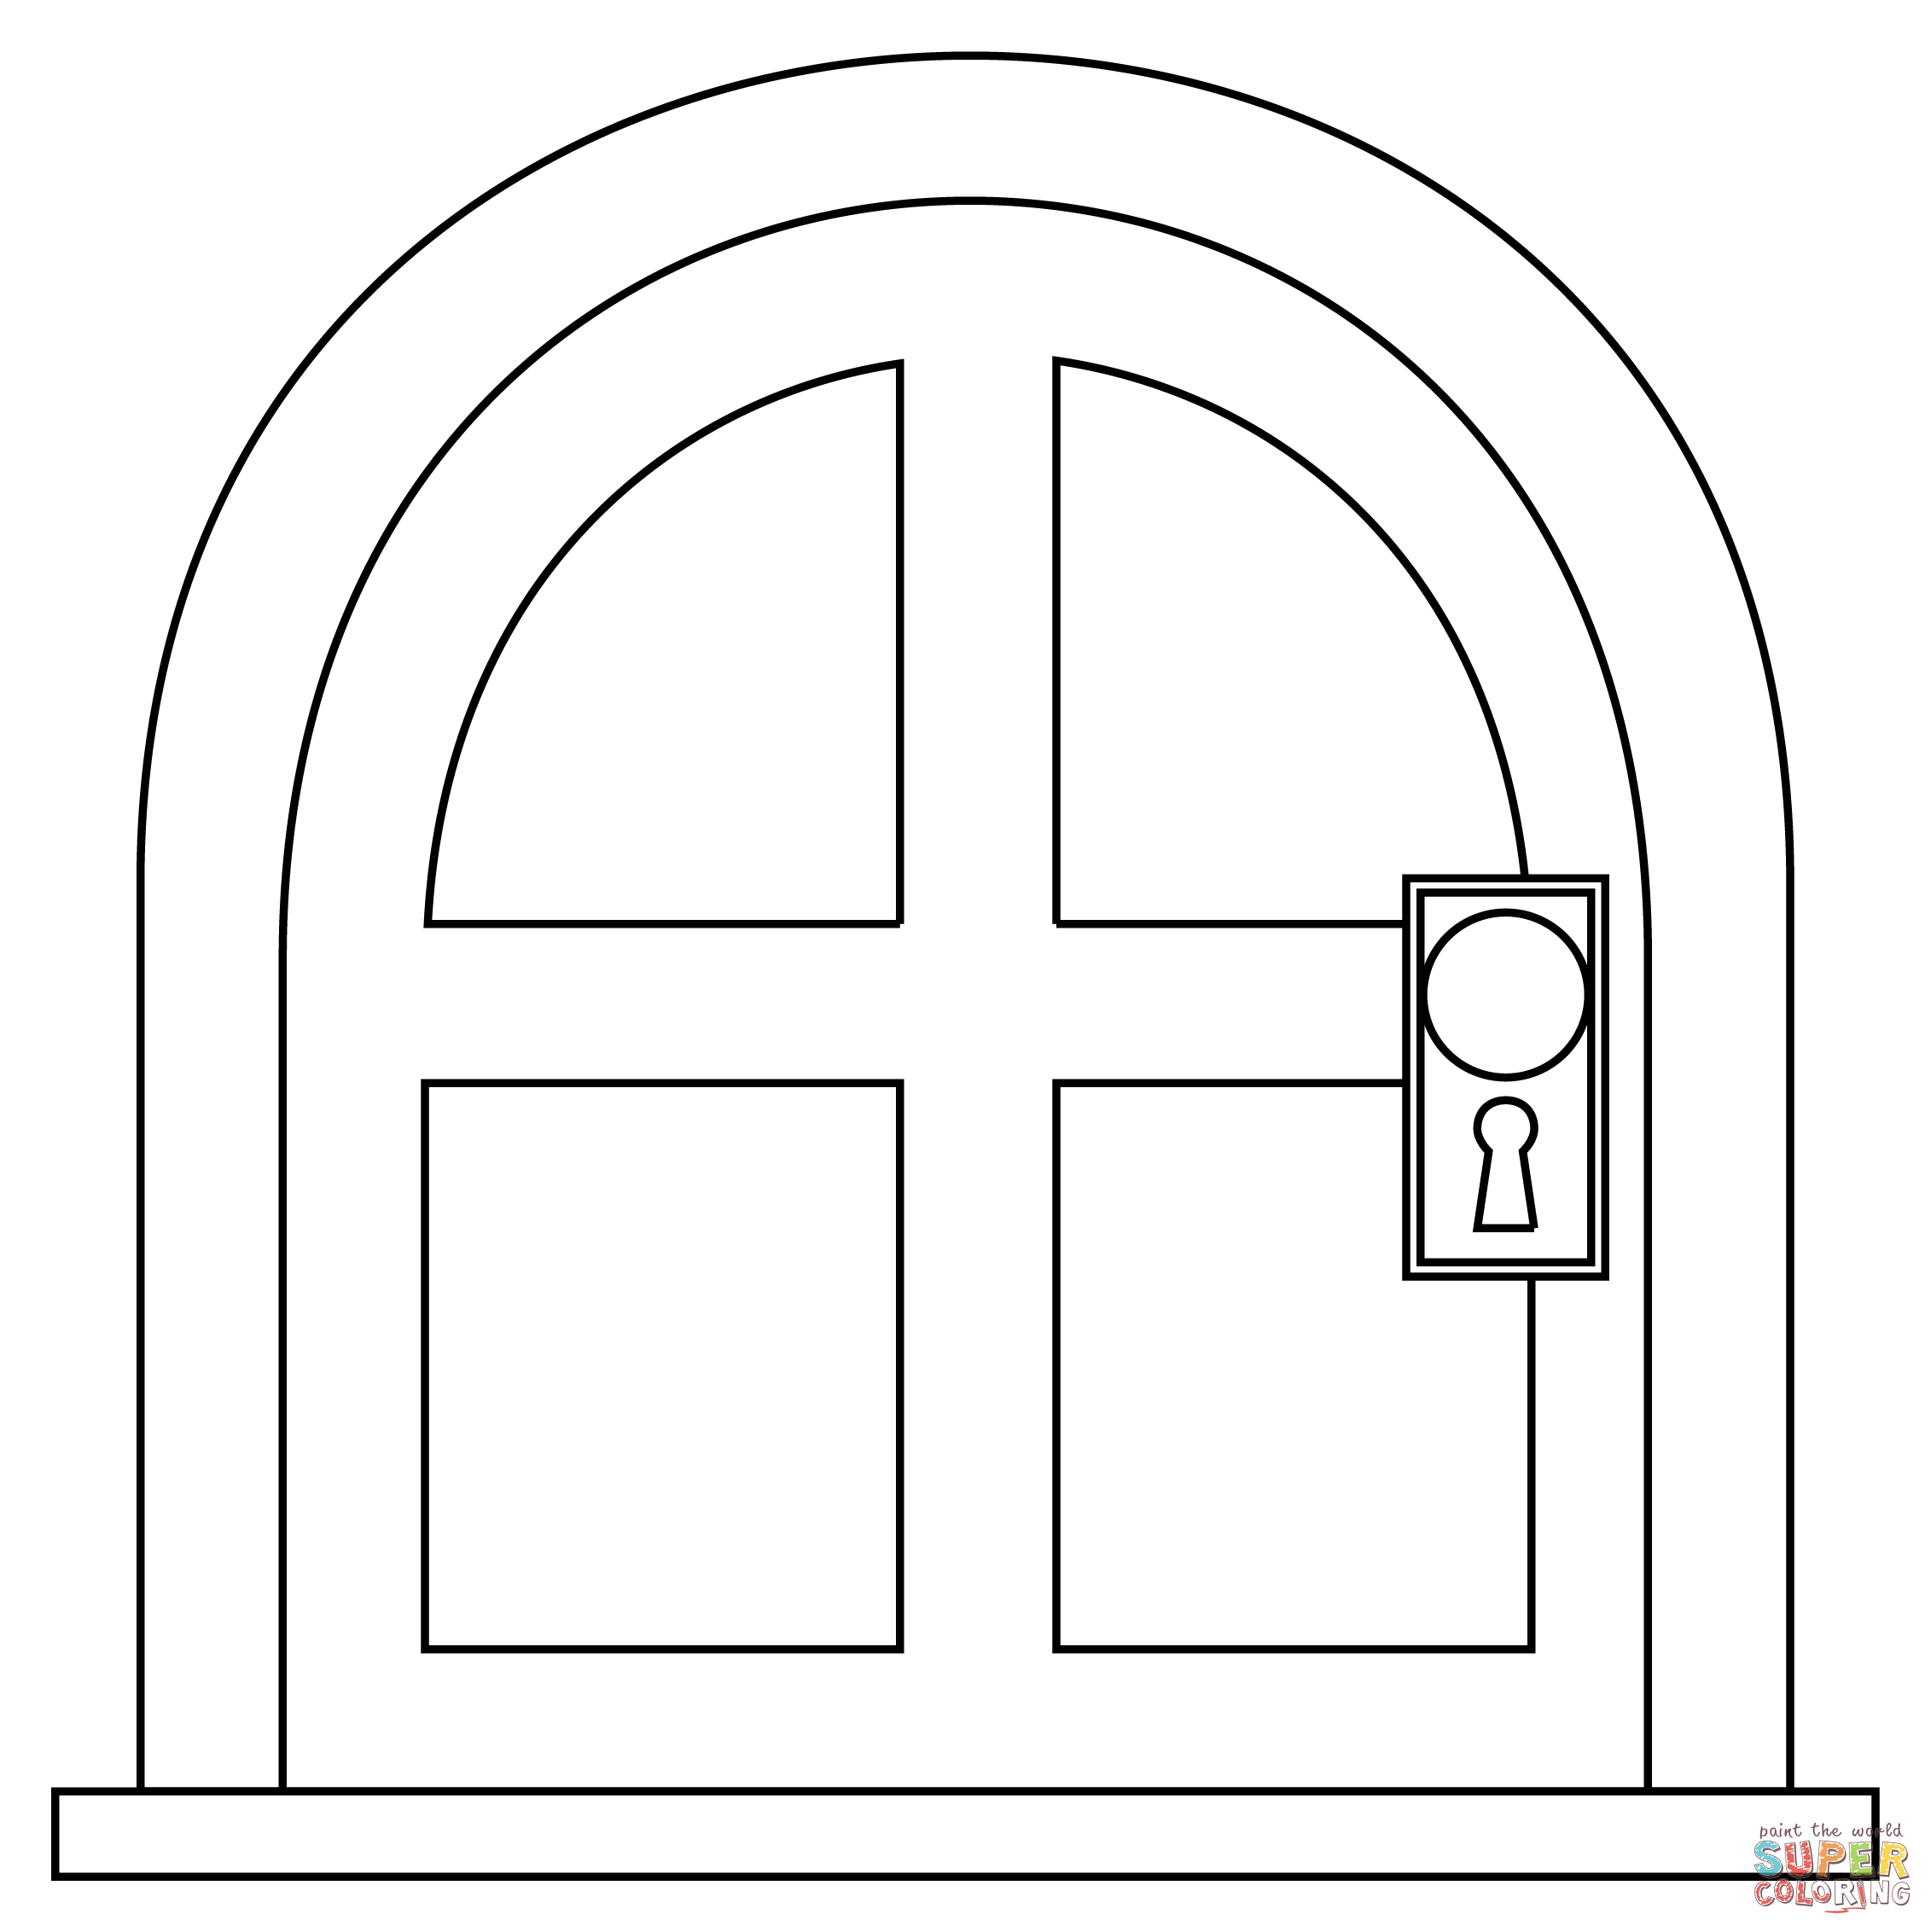 Door coloring page | Free Printable Coloring Pages